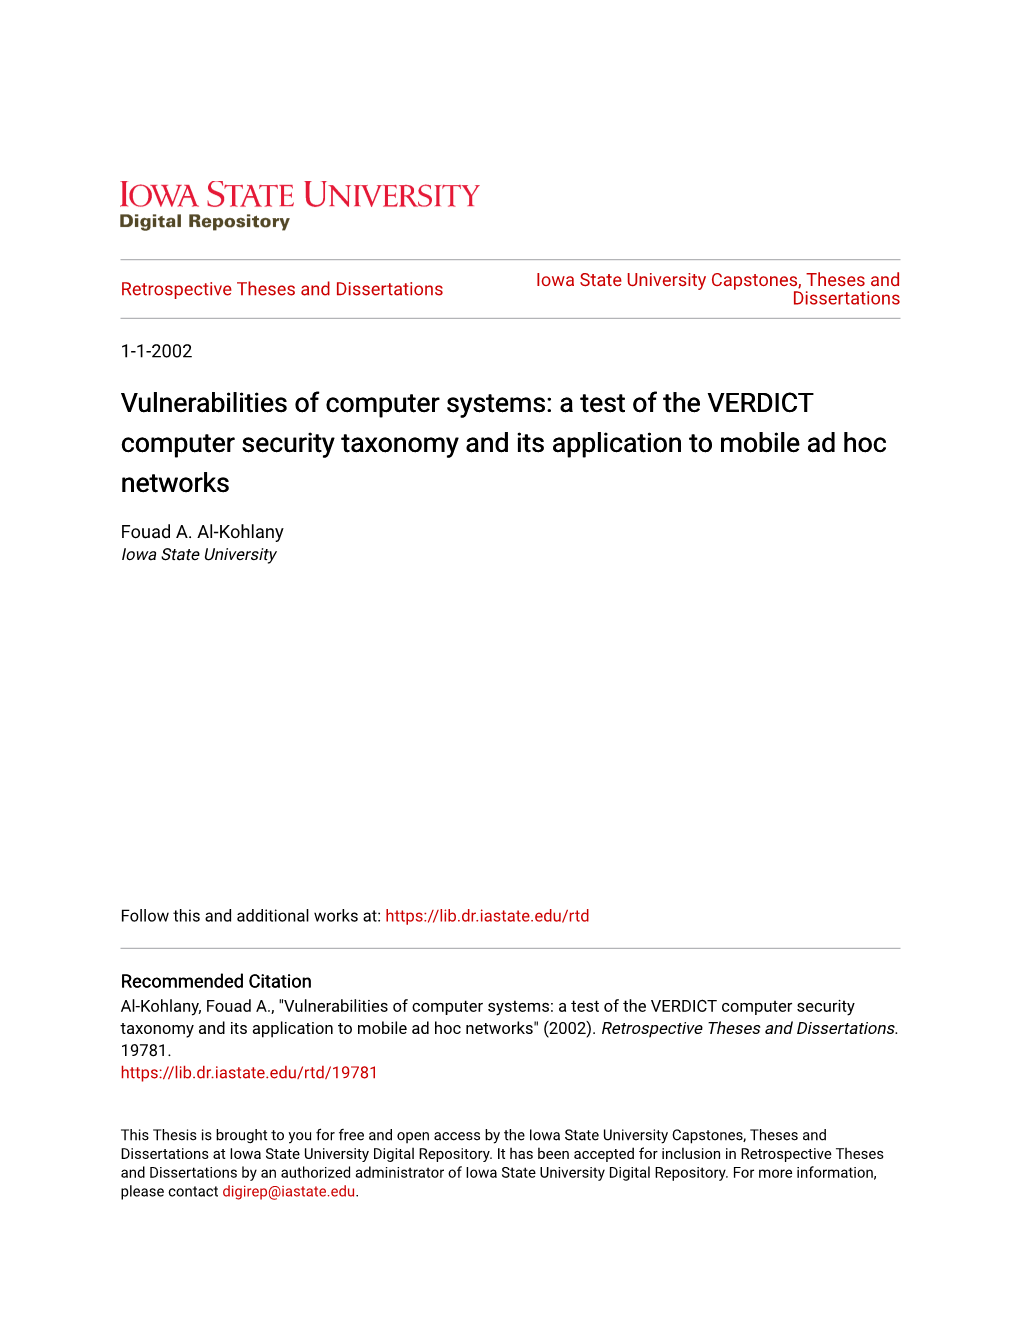 Vulnerabilities of Computer Systems: a Test of the VERDICT Computer Security Taxonomy and Its Application to Mobile Ad Hoc Networks